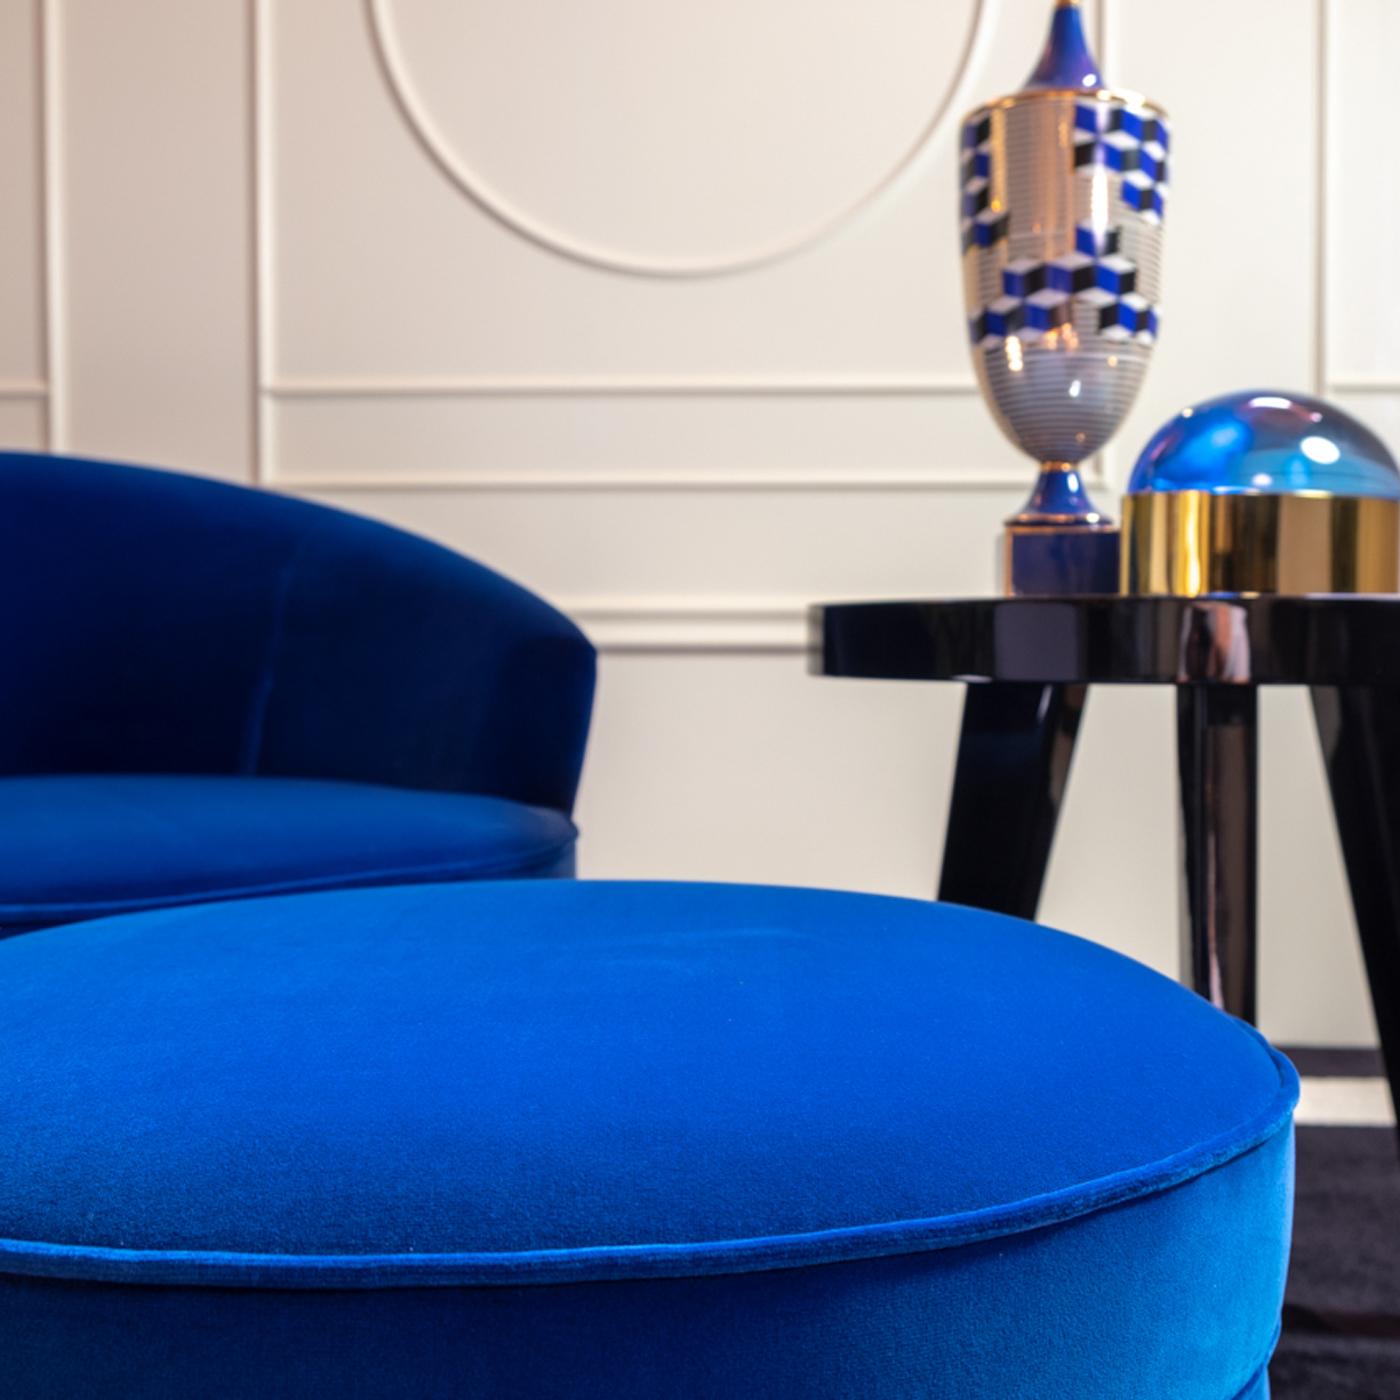 Designed by Domenico Mula as matching accessory for the Georgette Armchair, this pouf's retro-inspired look will fit elegantly in both classic and modern interiors. The round shape showcases a plush velvet fabric cover in cobalt blue with vertical